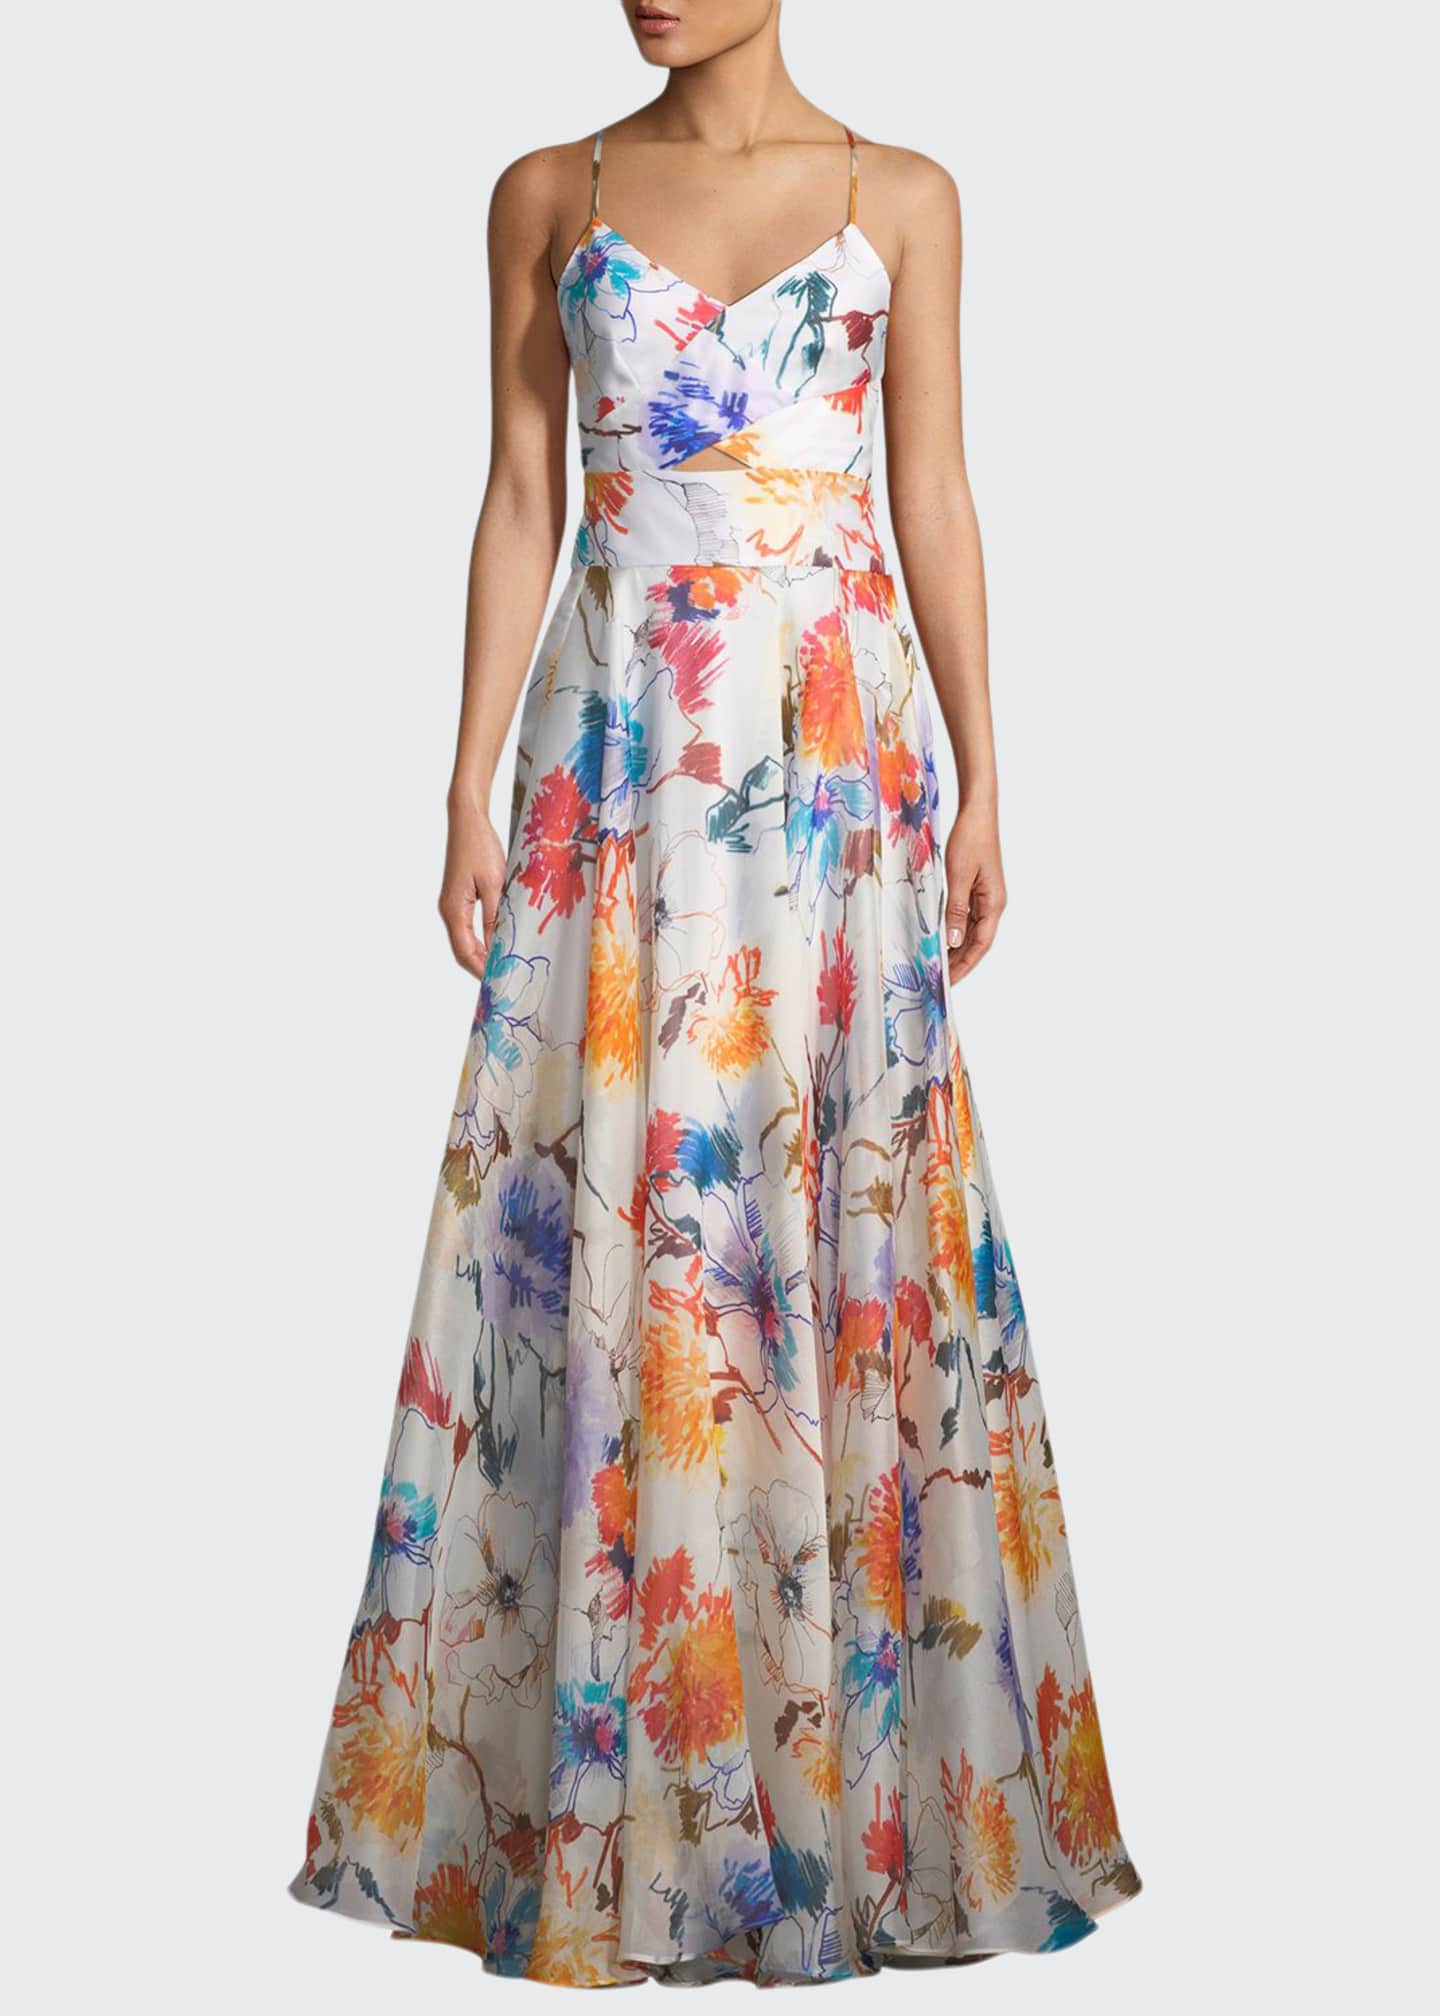 Milly Alana Floral-Print Silk Gazar Gown Image 1 of 2